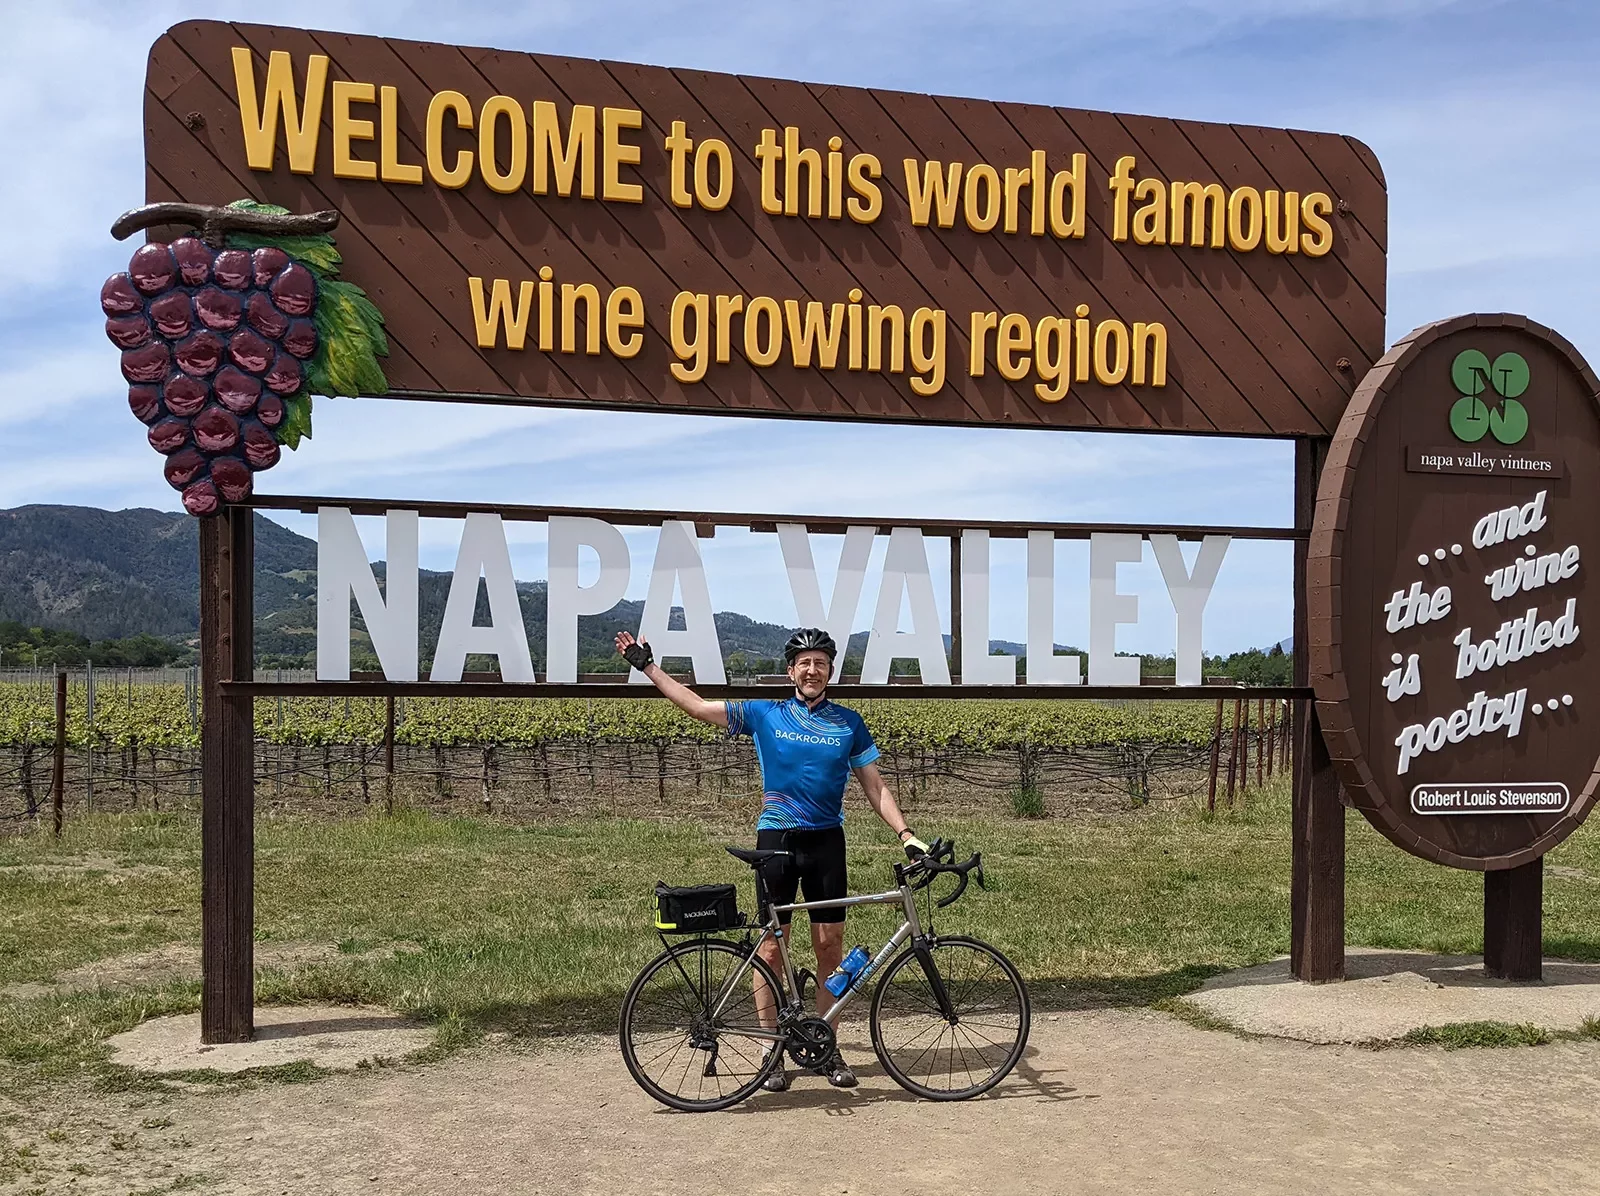 Guest with bike in front of &quot;WELCOME TO NAPA VALLEY&quot; sign.